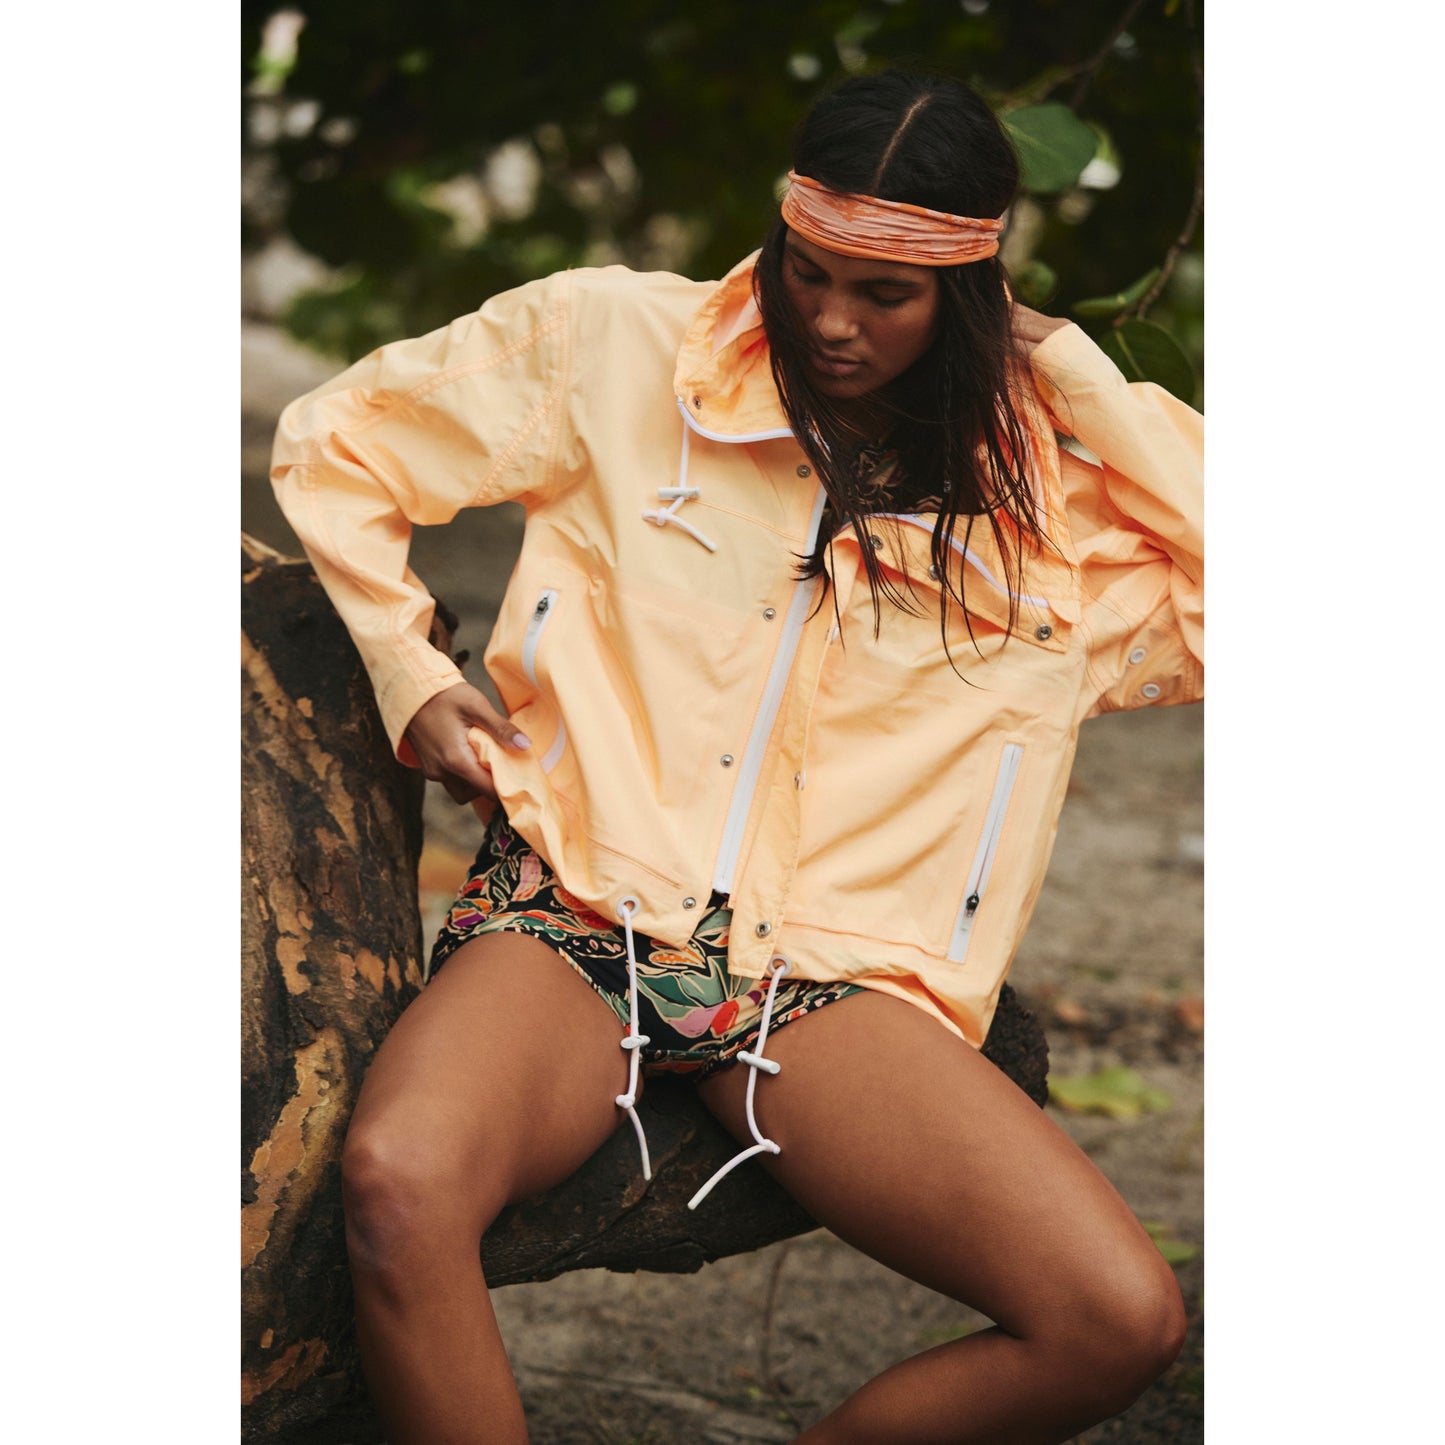 A woman sits on a log outdoors, wearing a Free People Movement Rain & Shine Jacket and patterned shorts, with a headband tied around her forehead.